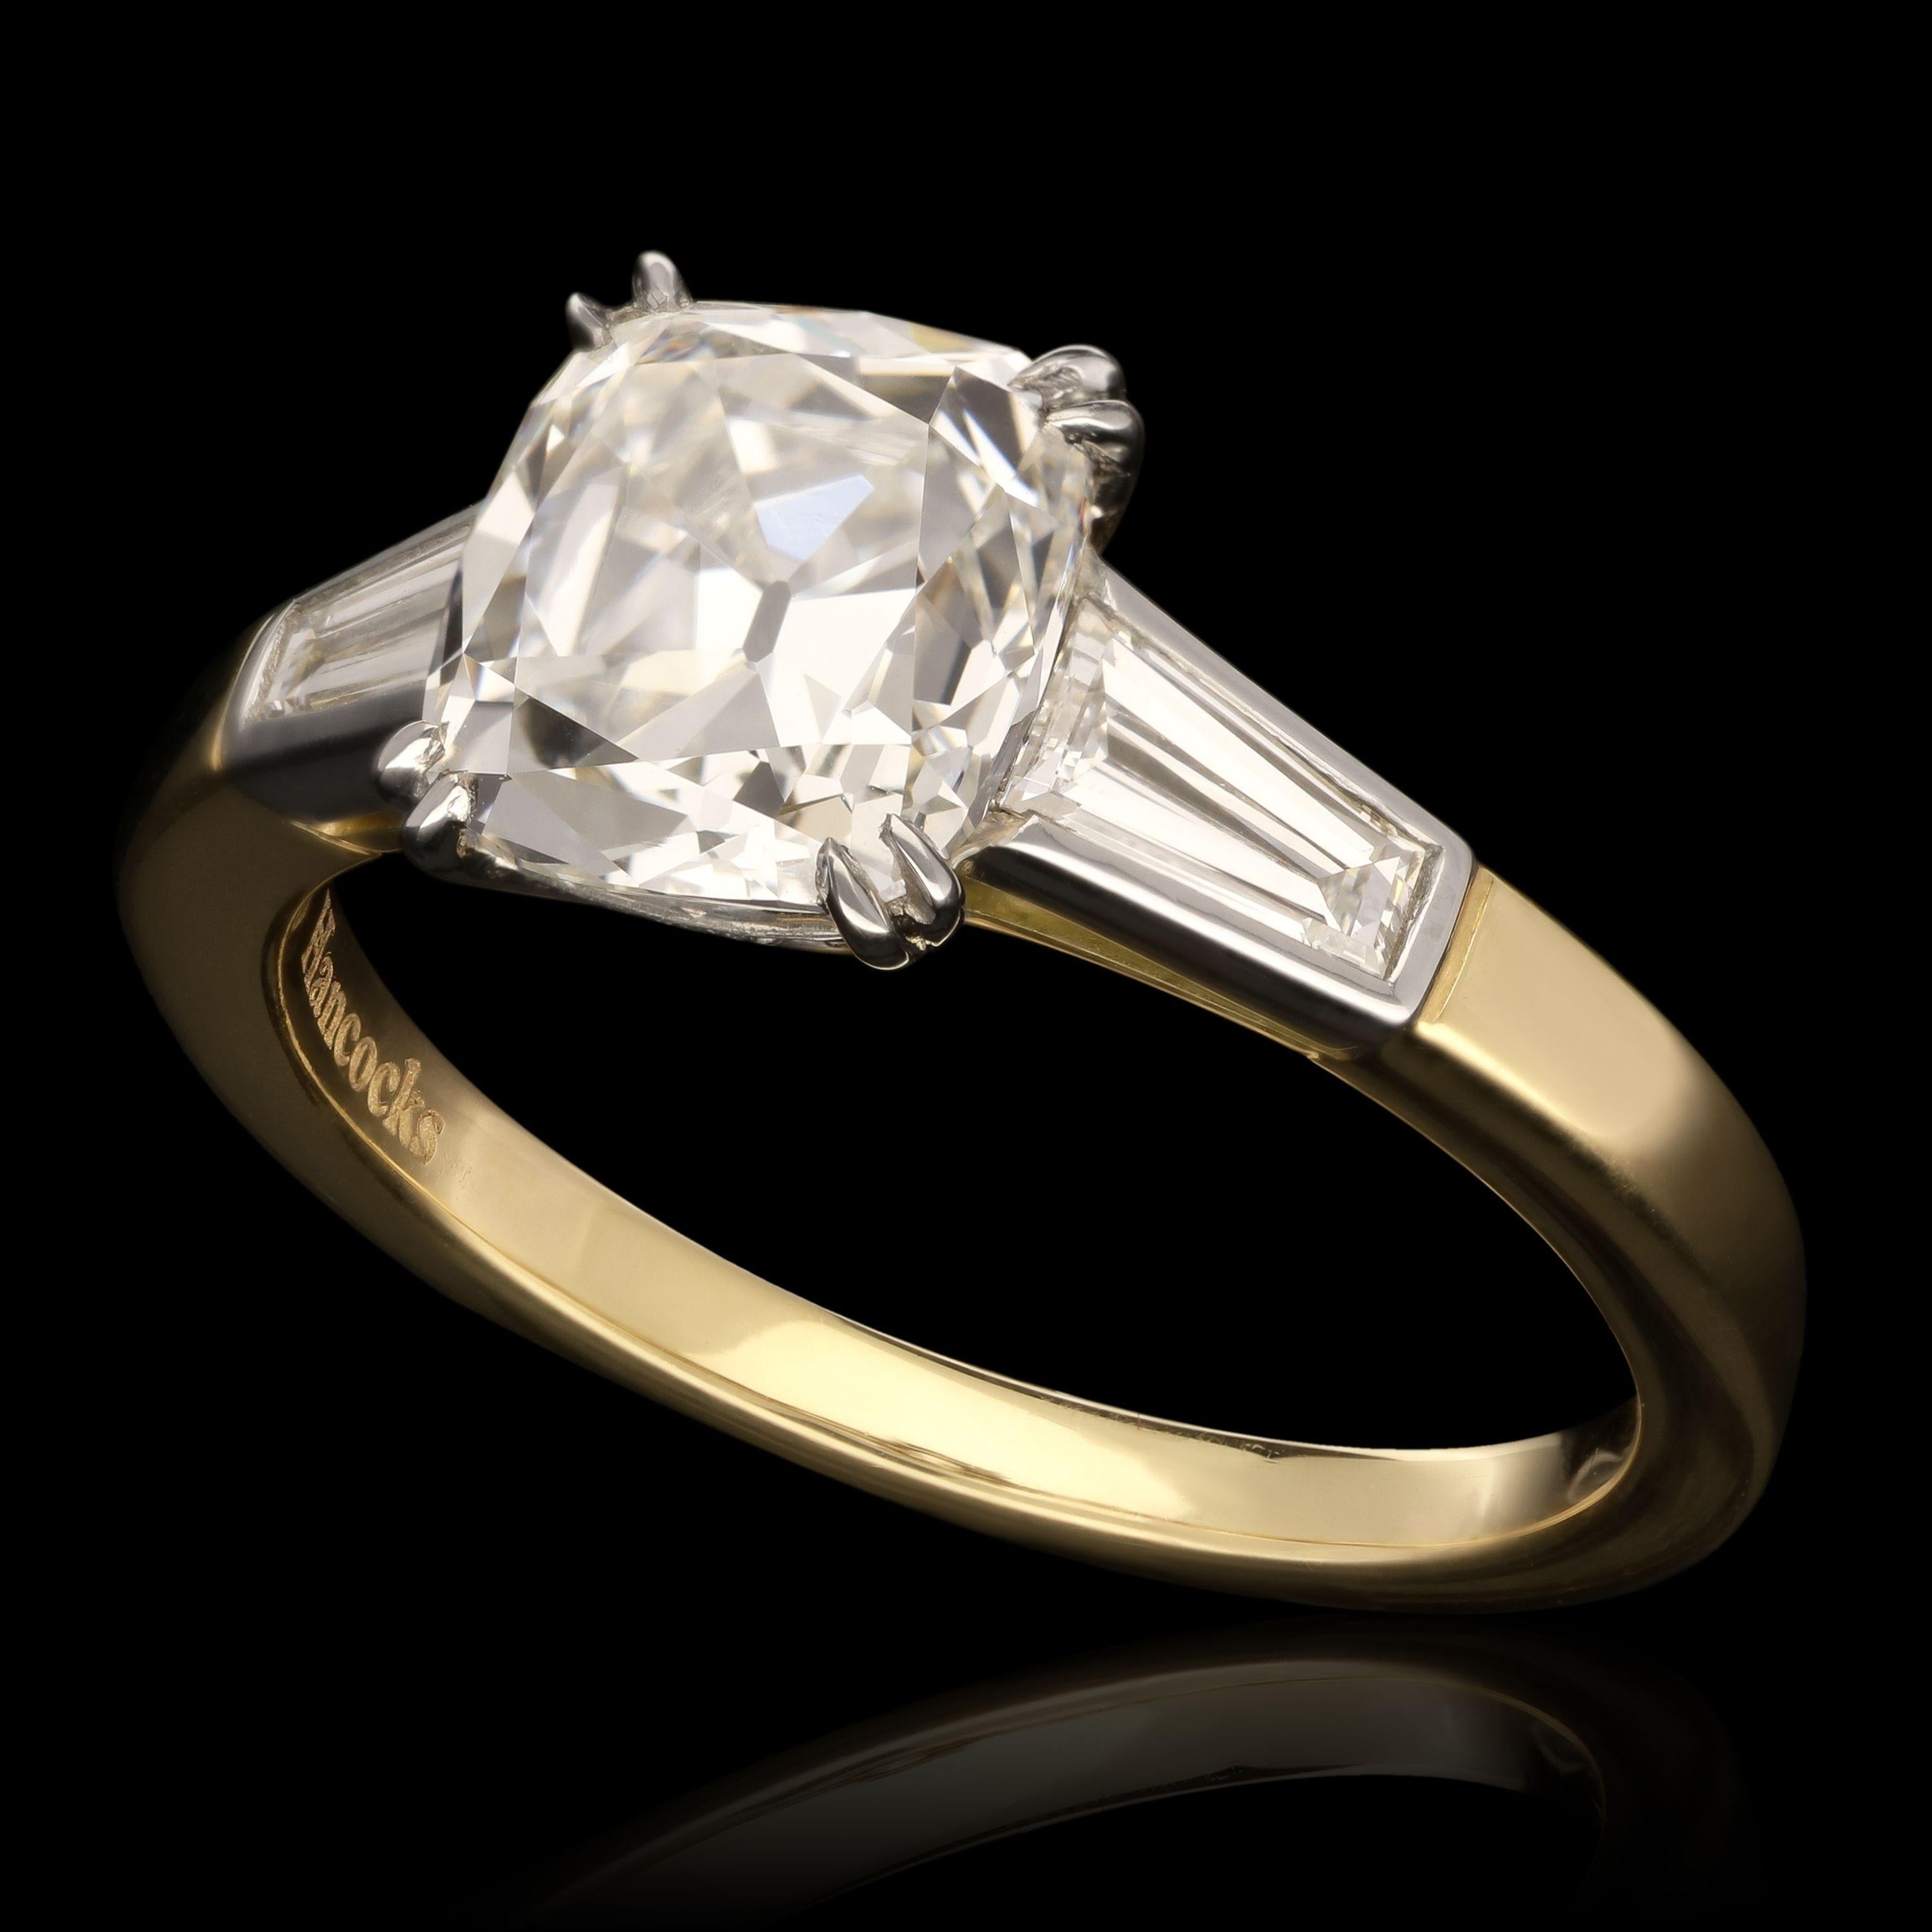 A beautiful old cut diamond ring by Hancocks, centred with a bright and lively cushion shaped old mine brilliant cut diamond weighing 2.01ct and of G colour and SI1 clarity claw set in platinum to a diamond-set gallery between shoulders of bezel set